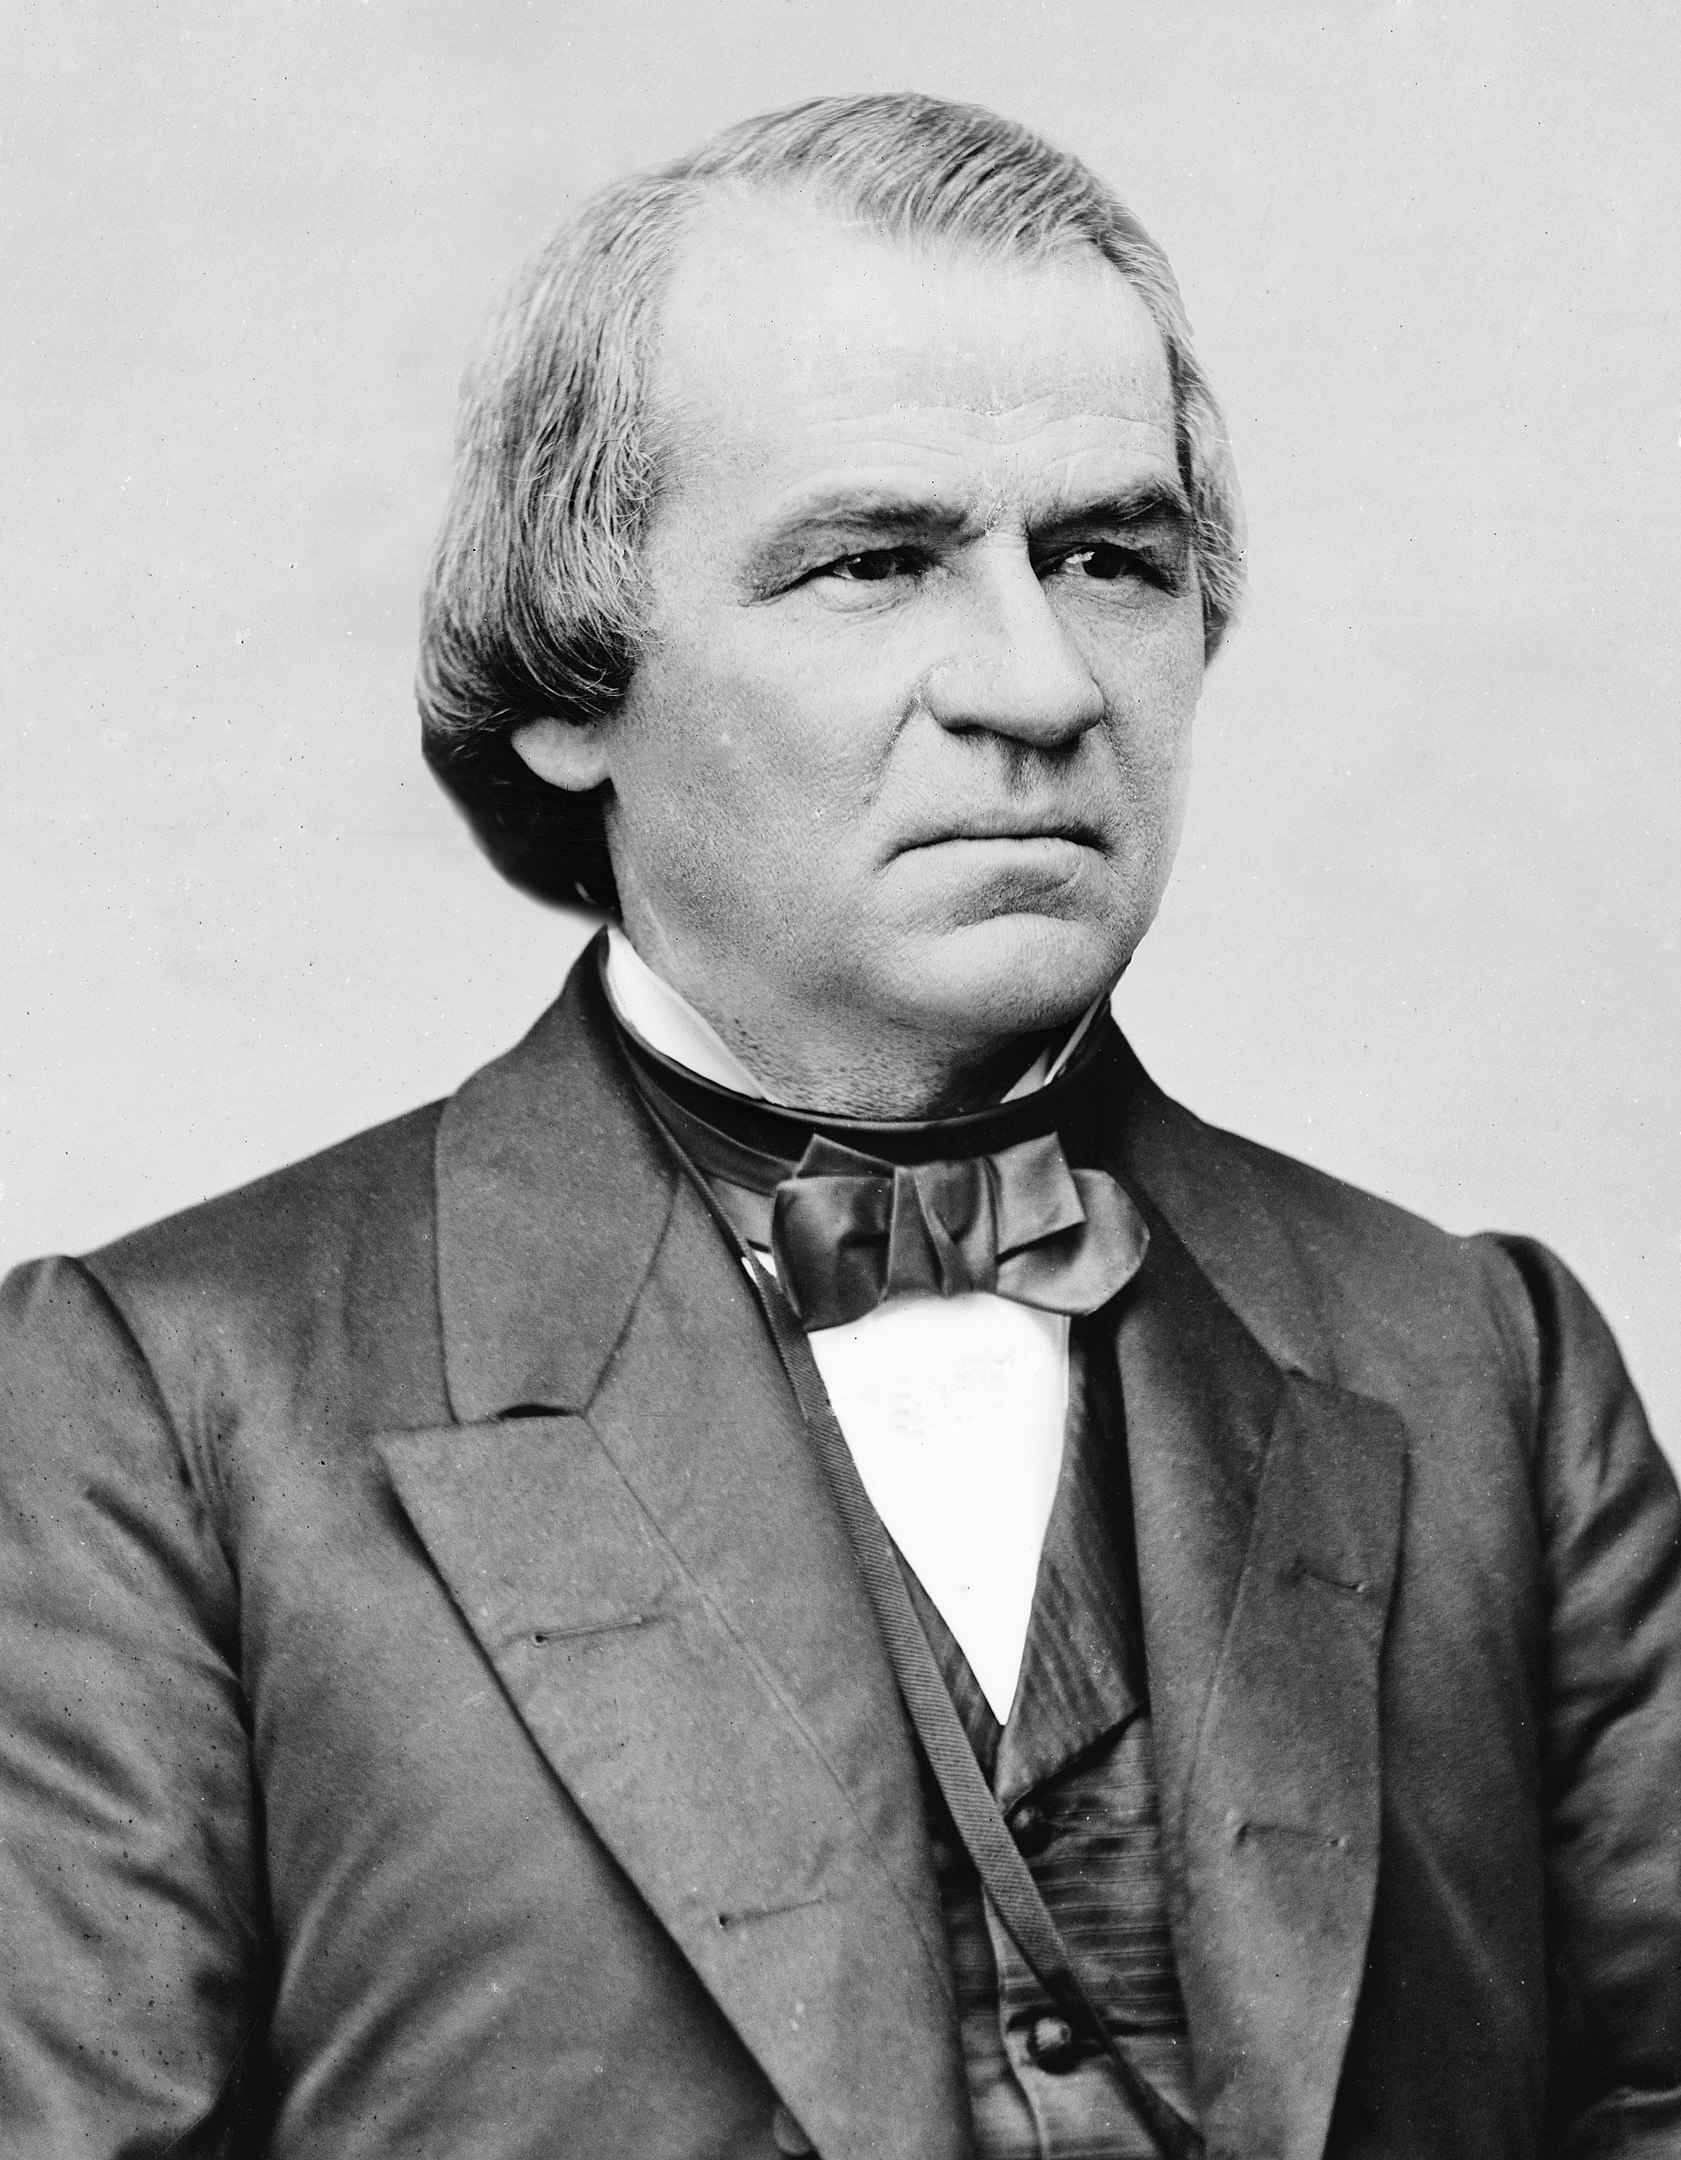 Policies during Andrew Johnson’s administration